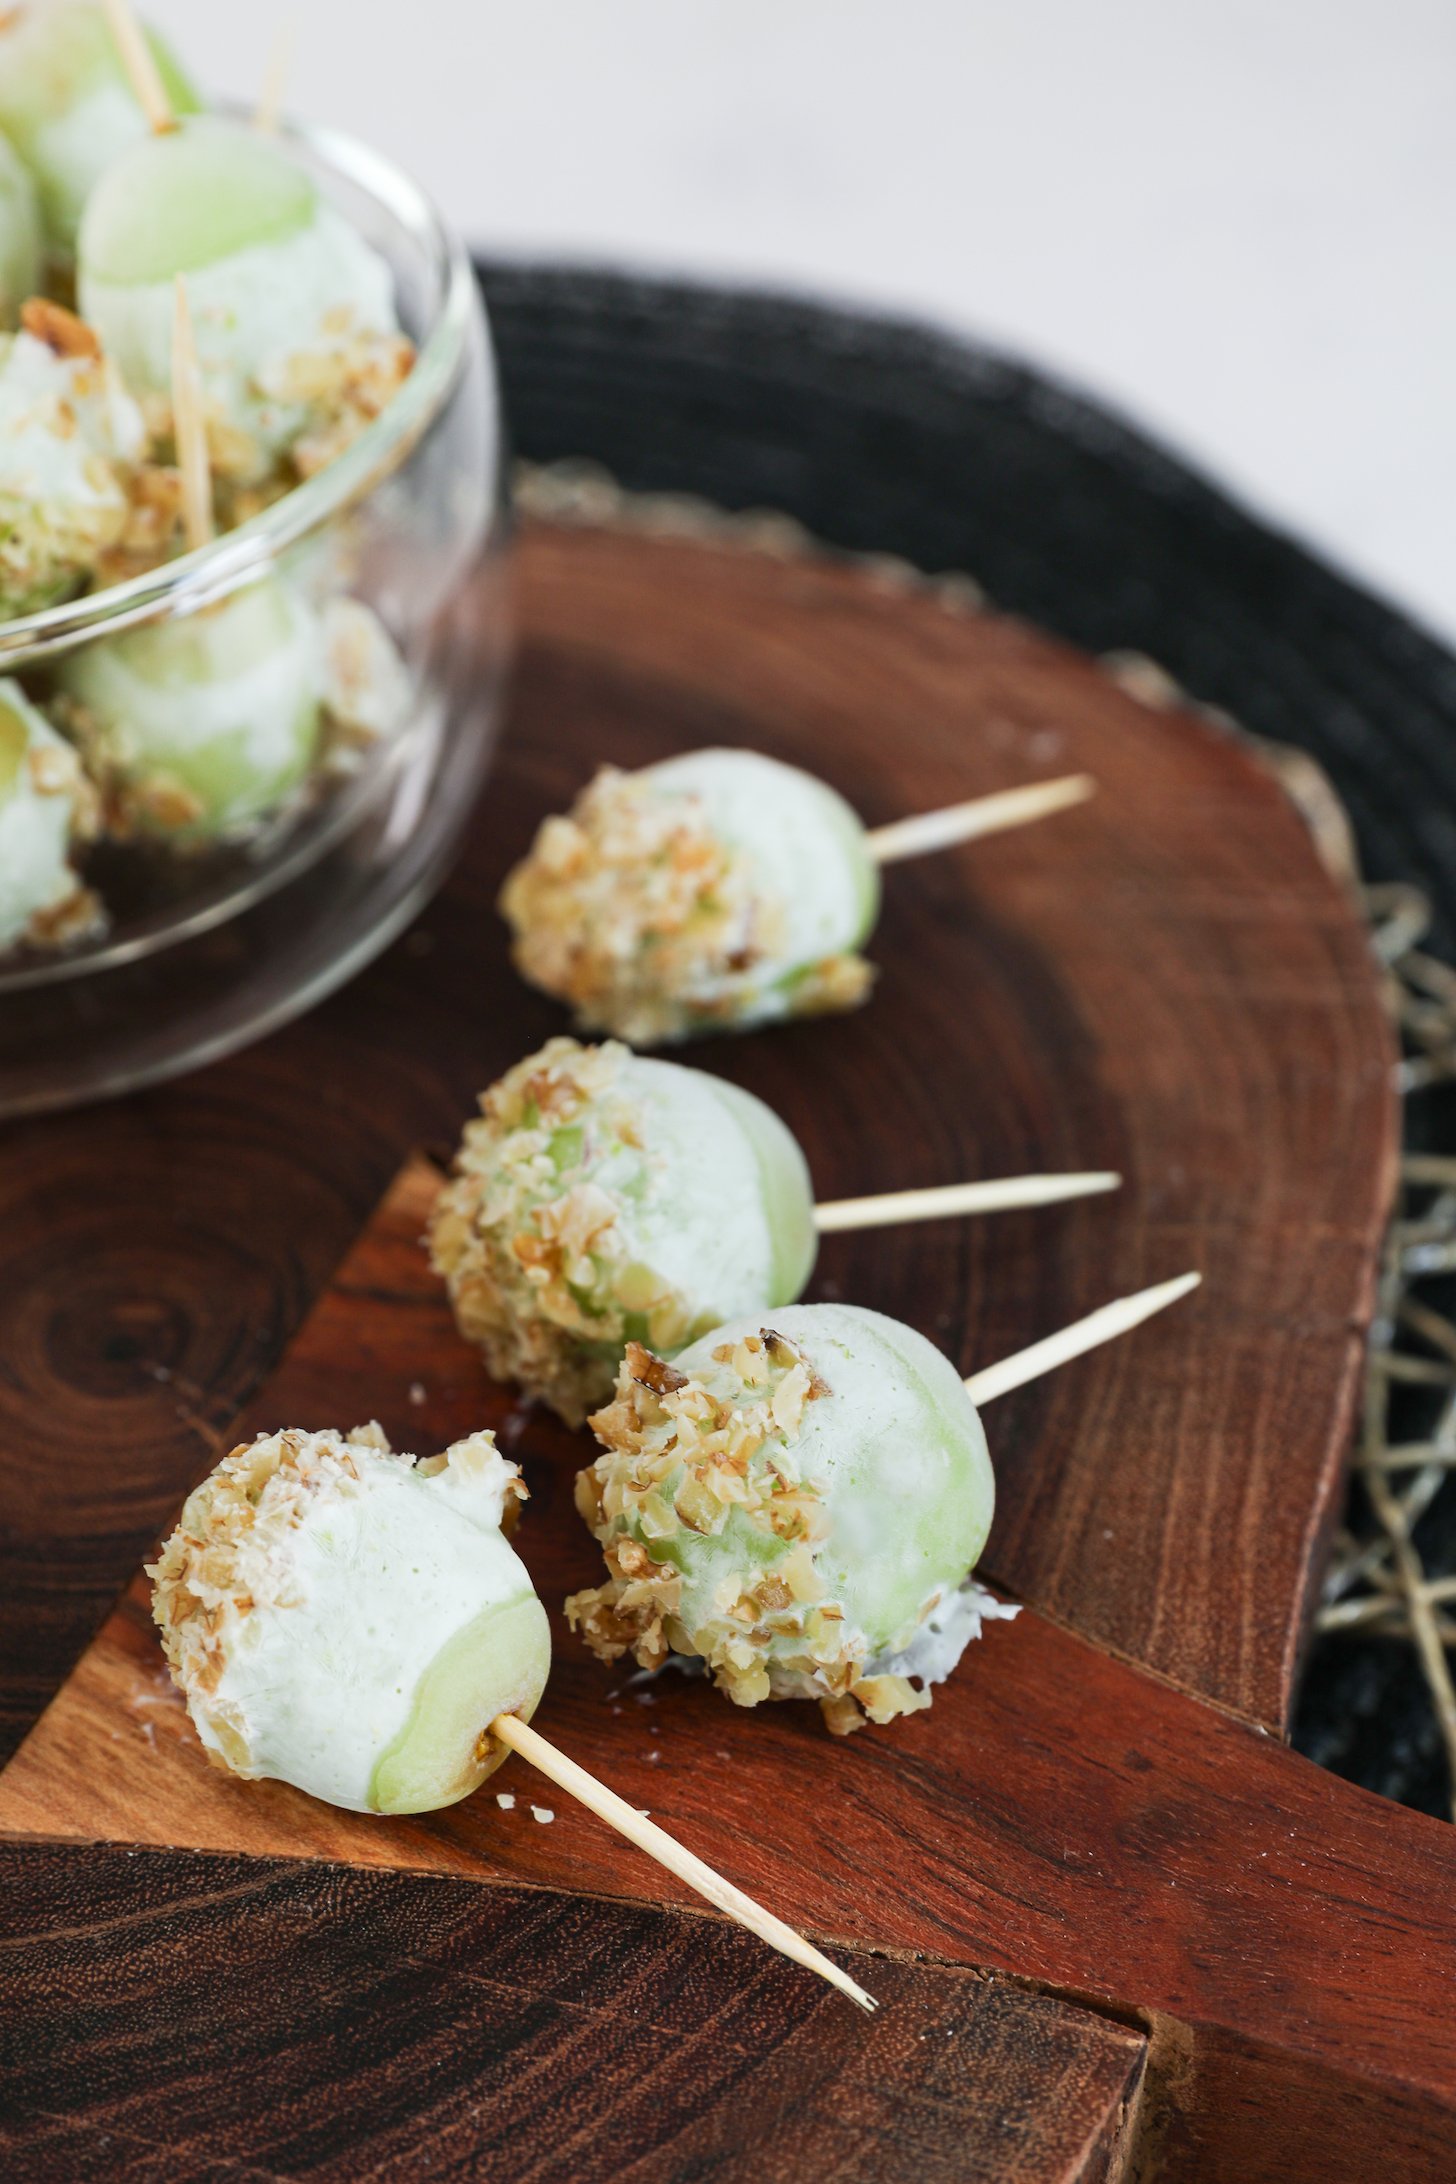 An image displays four grapes on wooden picks, covered in yogurt and topped with crushed nuts.